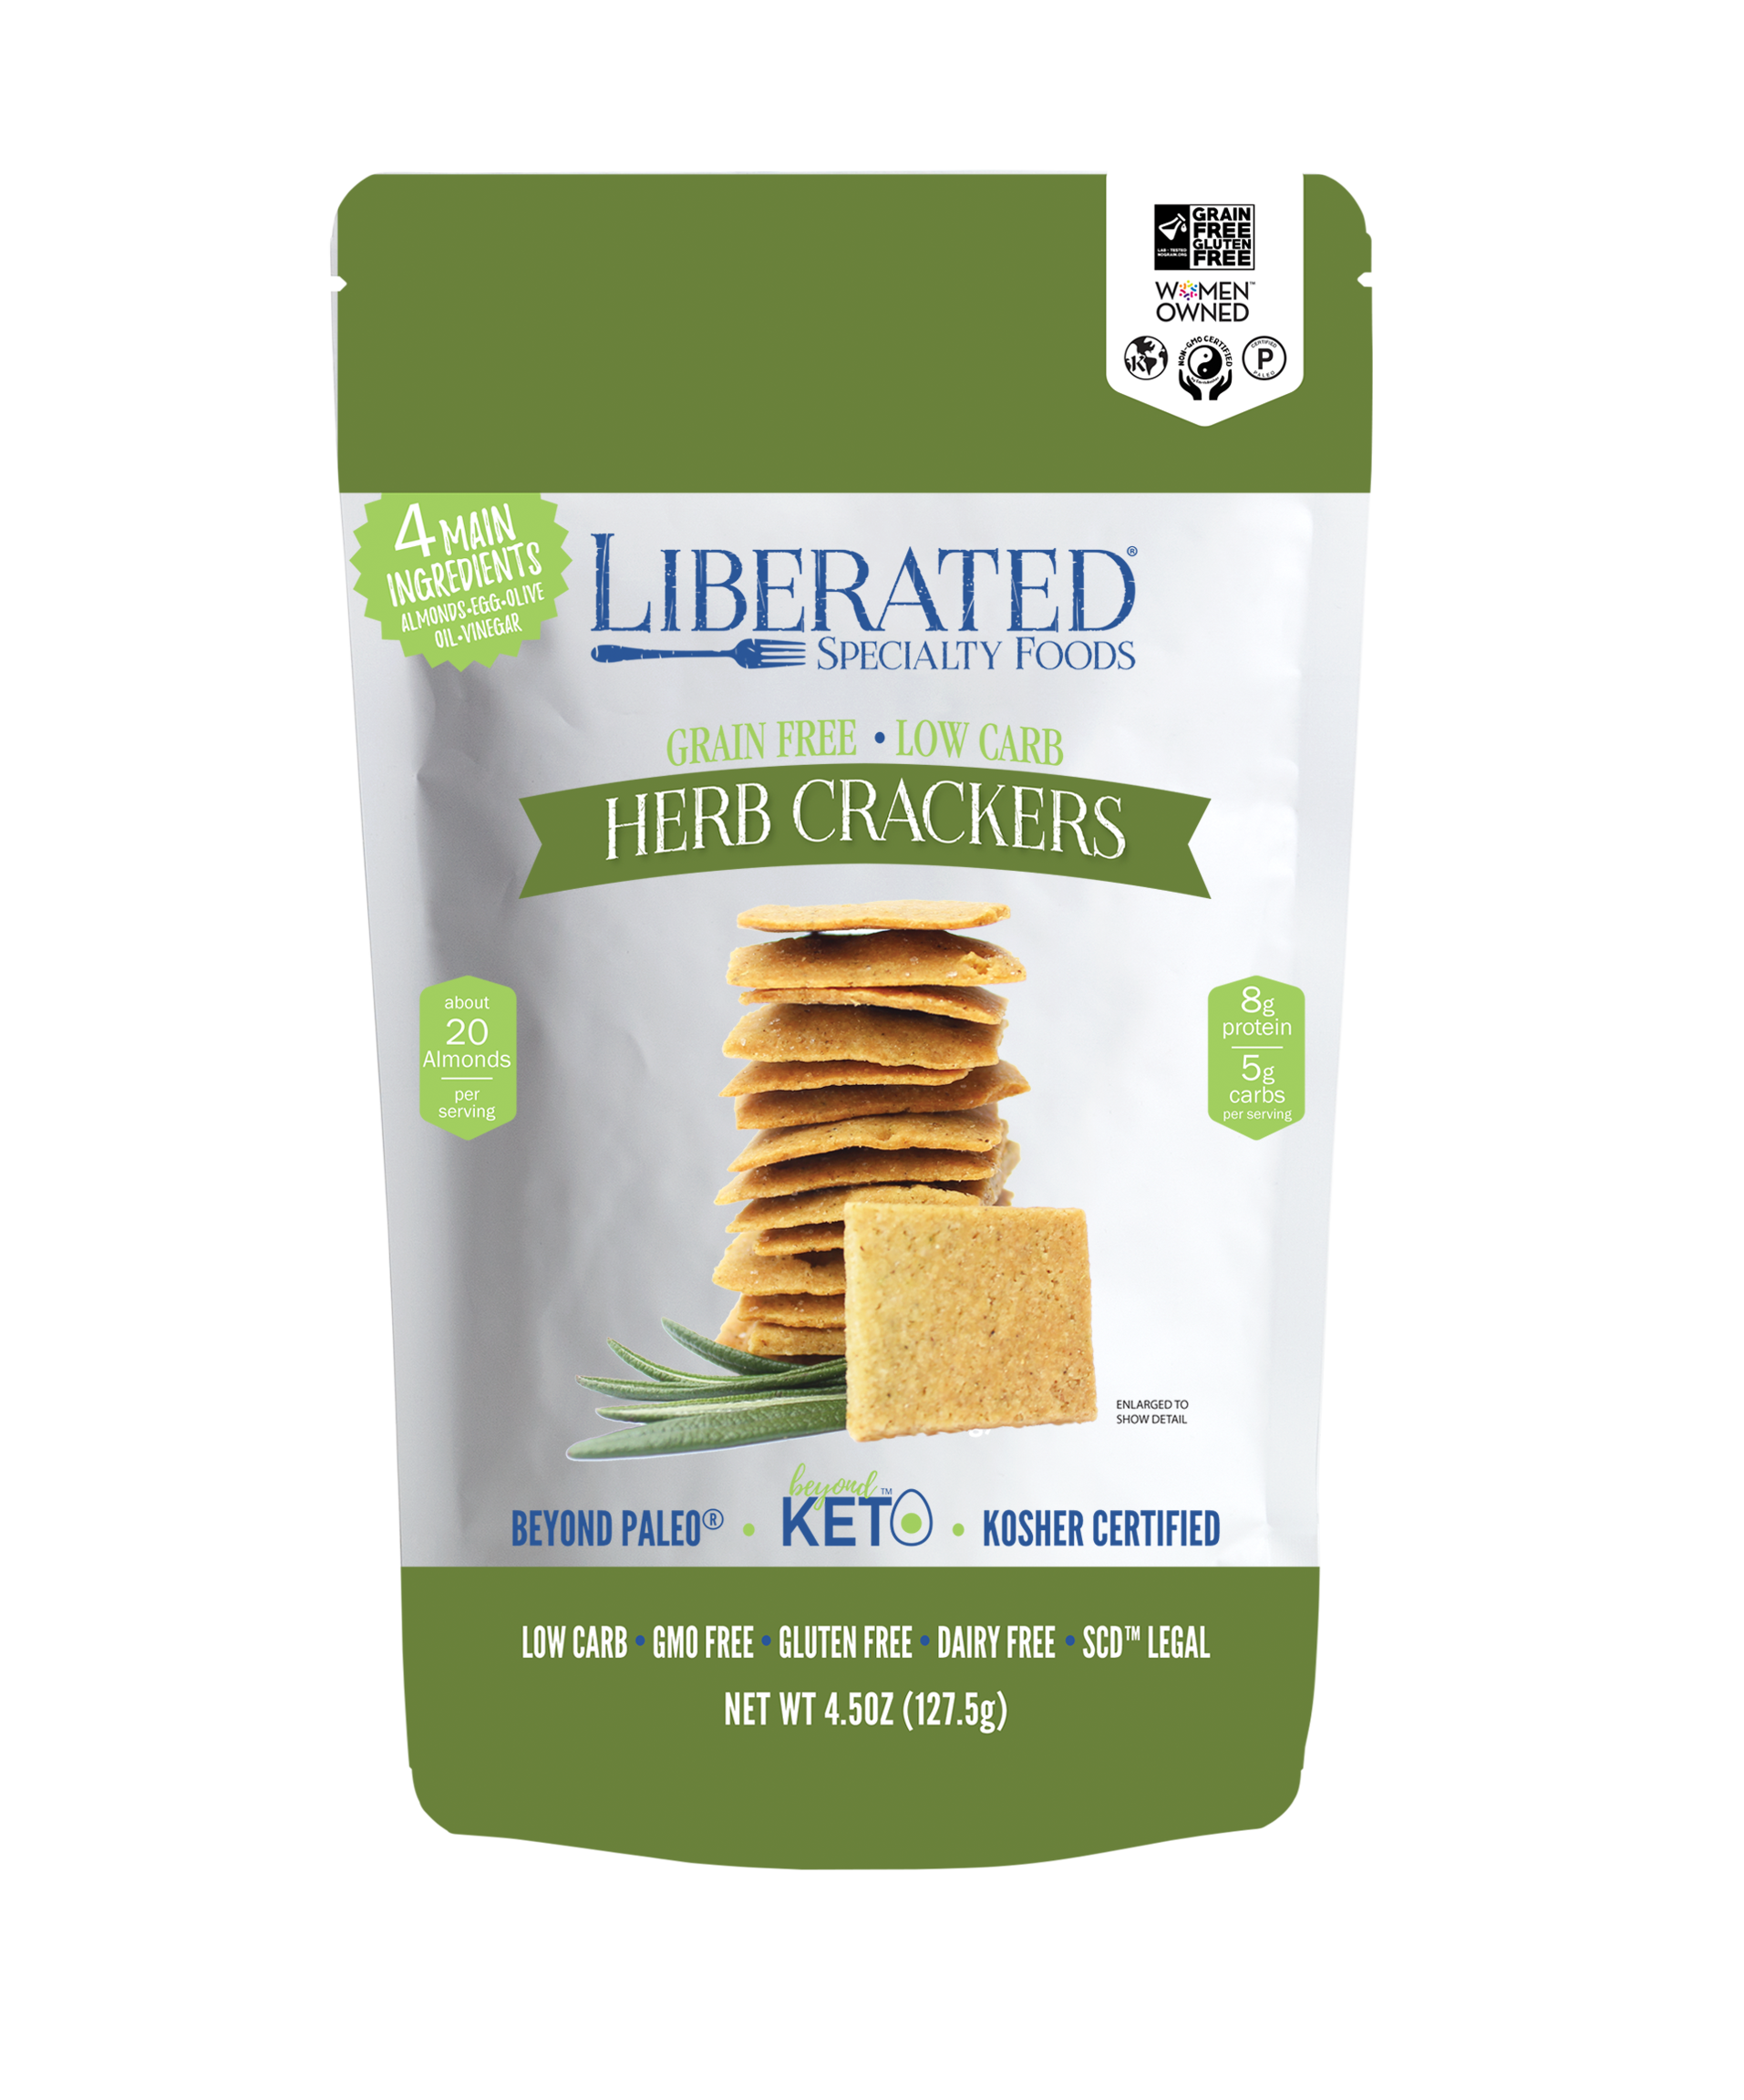 Herb Crackers Liberated Specialty Foods